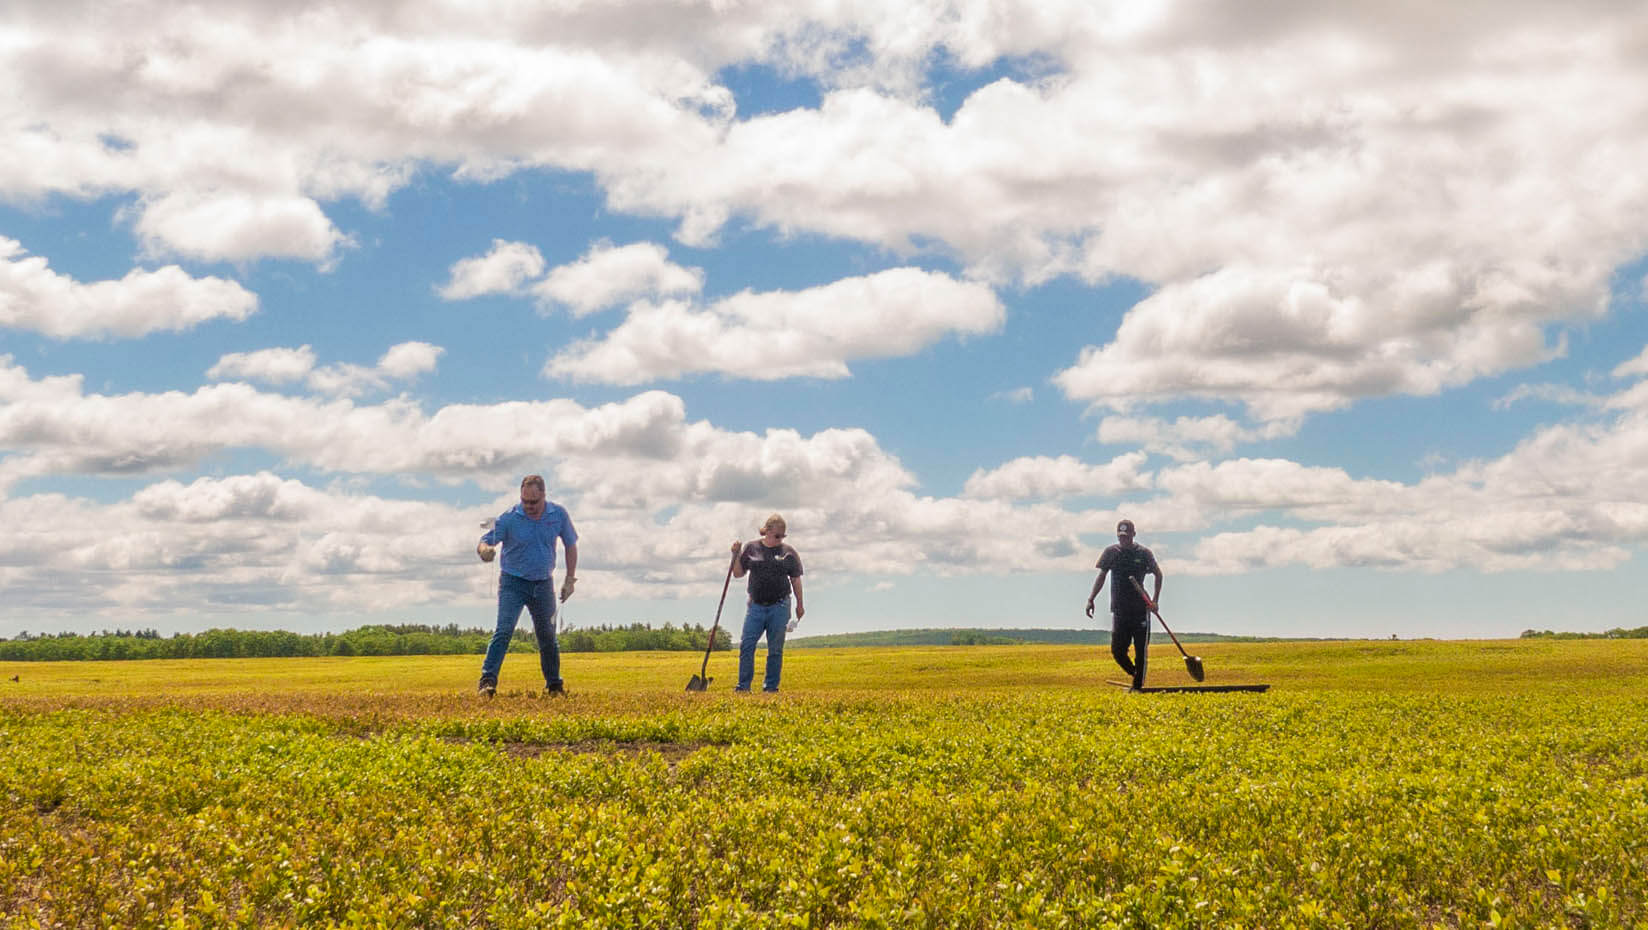 A photo of three people standing in a field